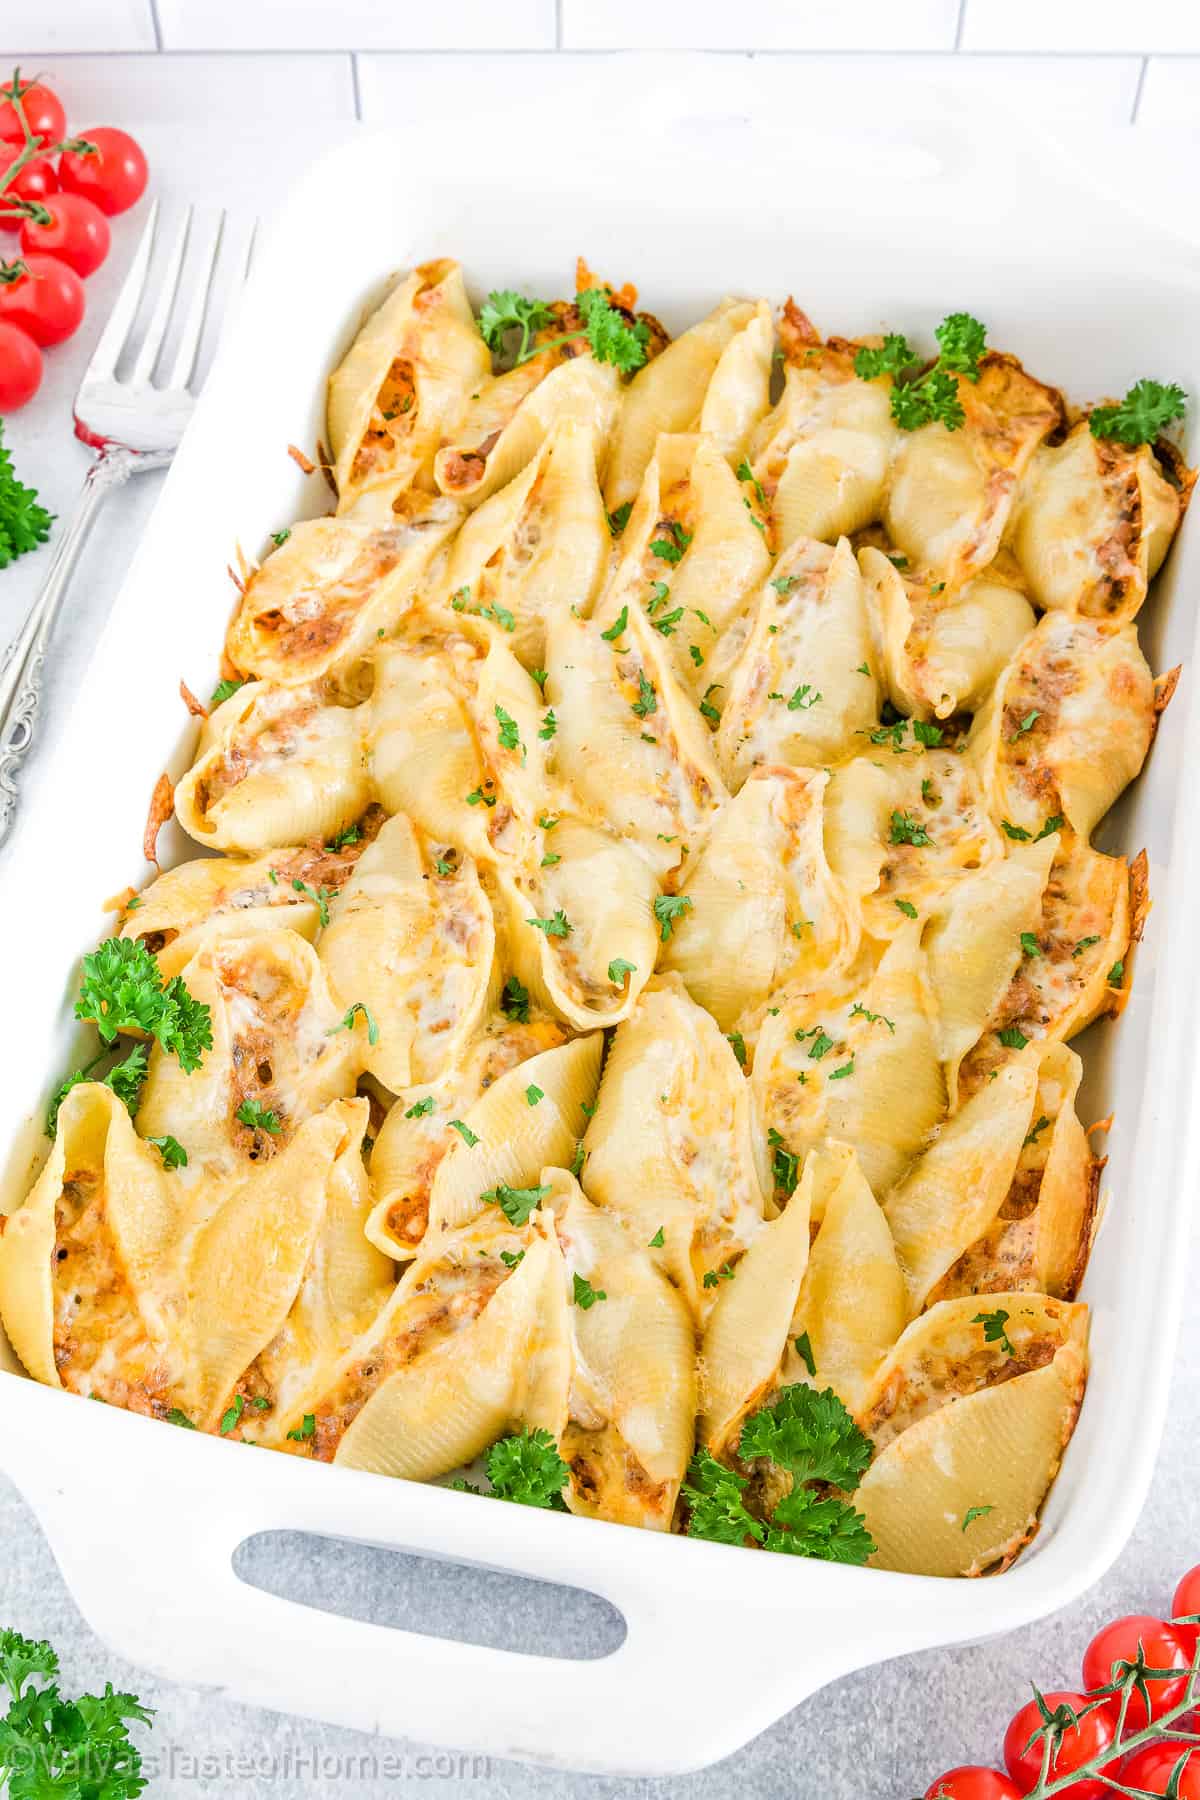 This Stuffed Shells recipe features pasta shells filled with a mixture of ground beef, mushrooms and cheeses that's baked to perfection in a garlic pasta sauce.